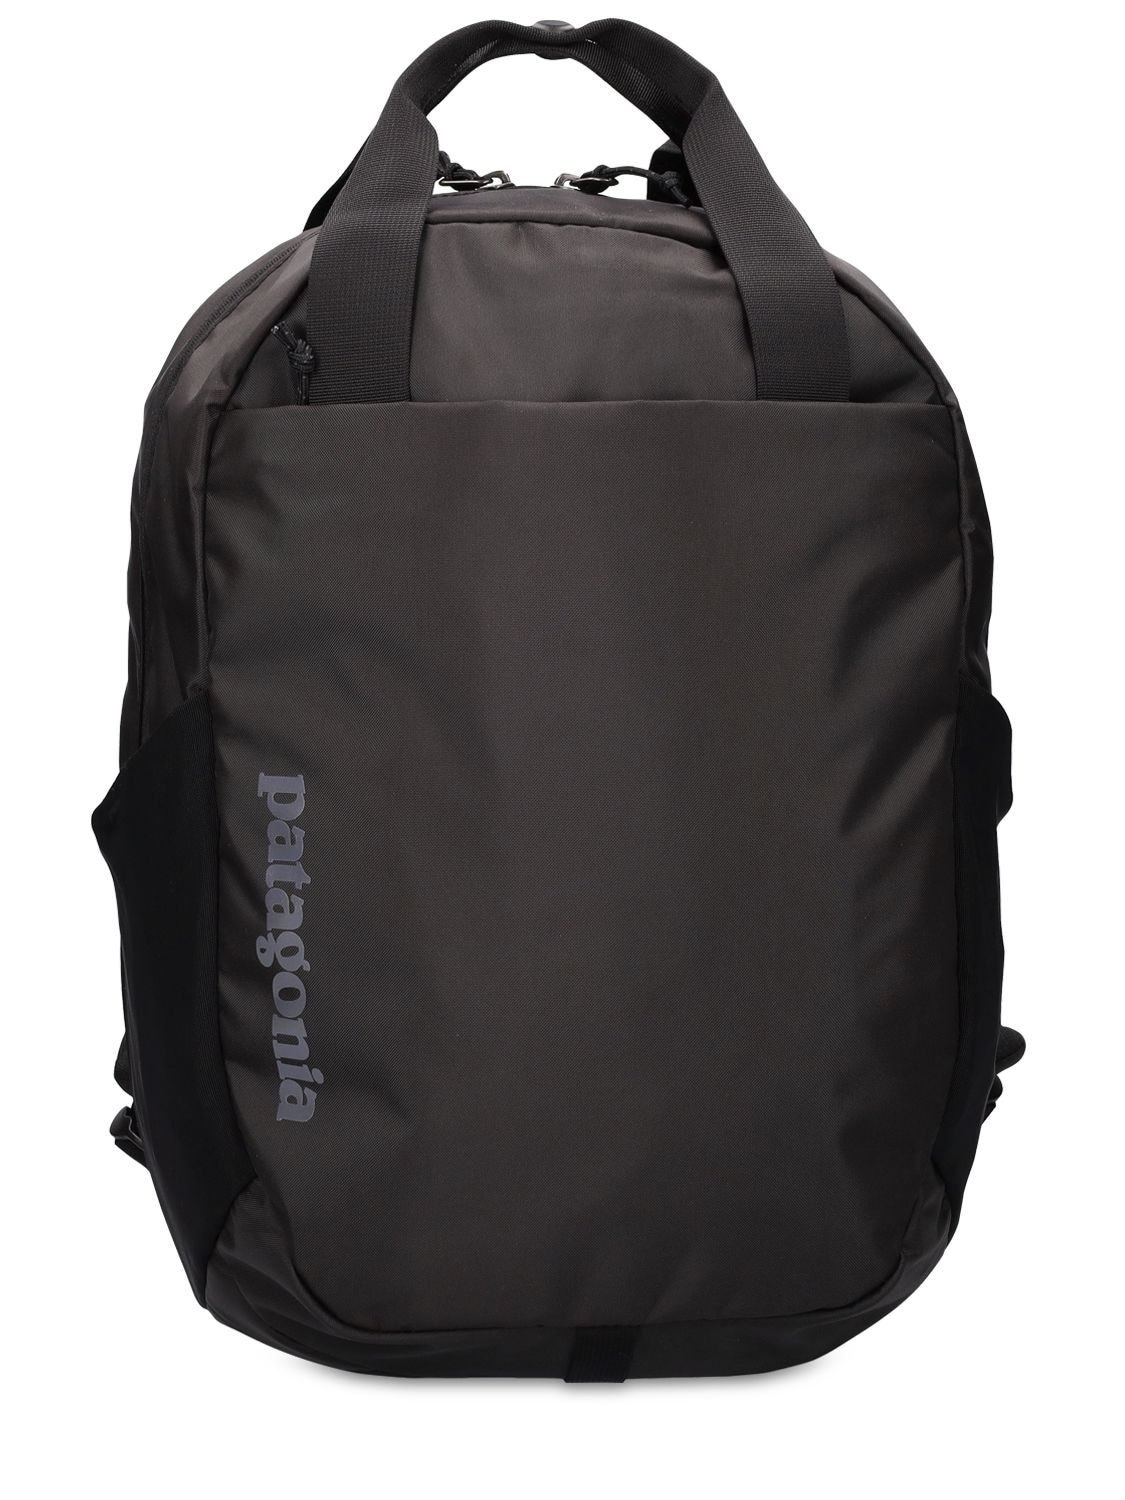 20l Atom Recycled Tech Backpack image